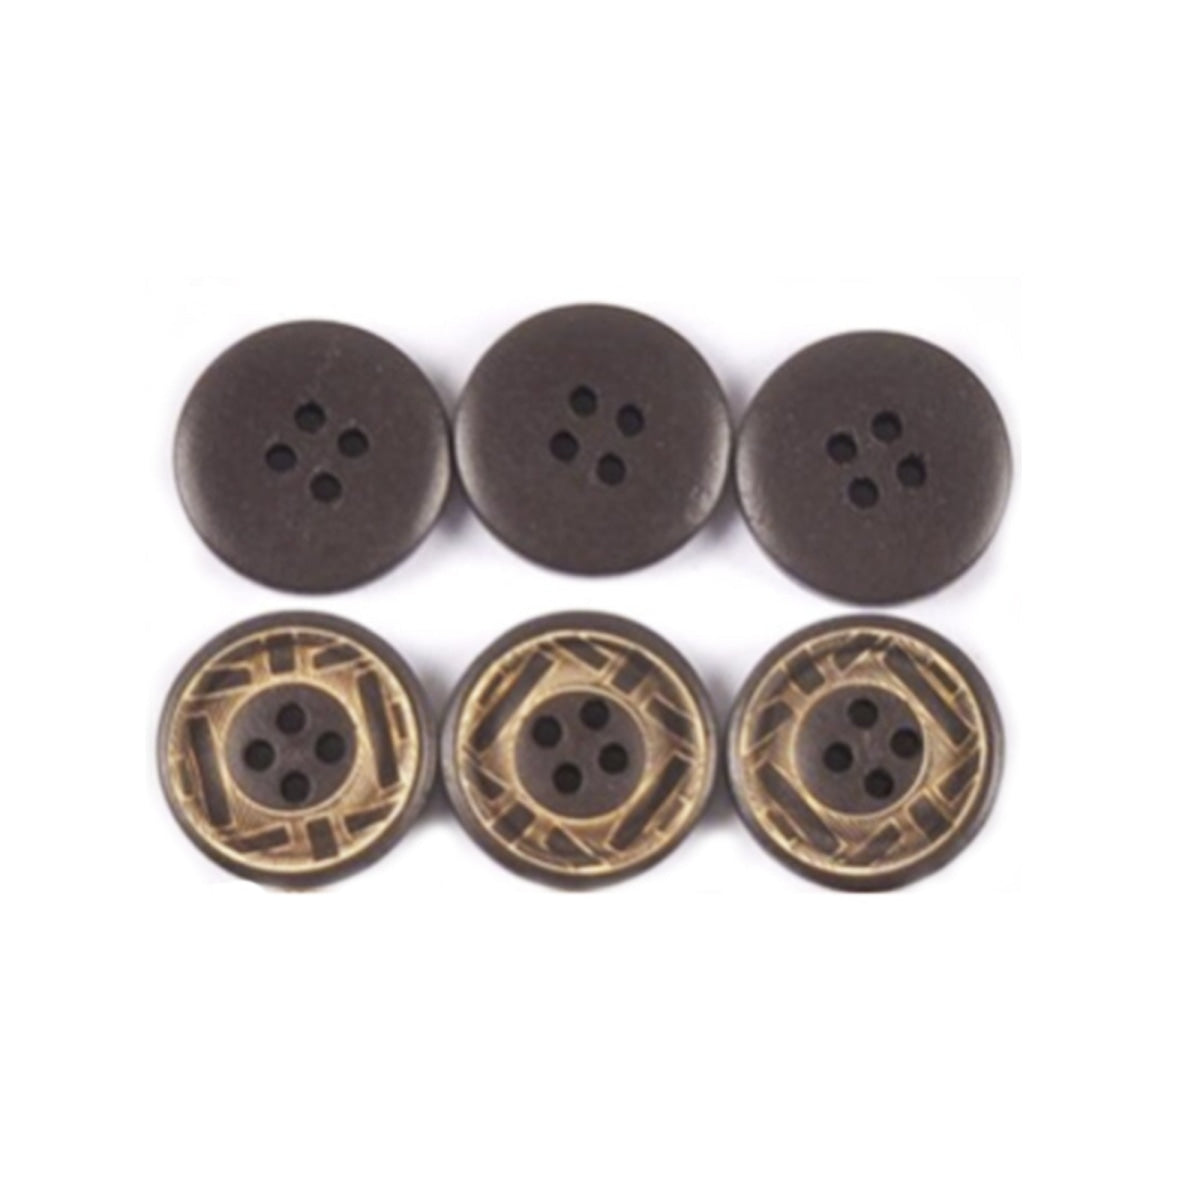 25Pcs Dark Brown Patterned Buttons 20Mm 4-Hole Rimmed Bevelled Edge Round Plastic Sewing Diy